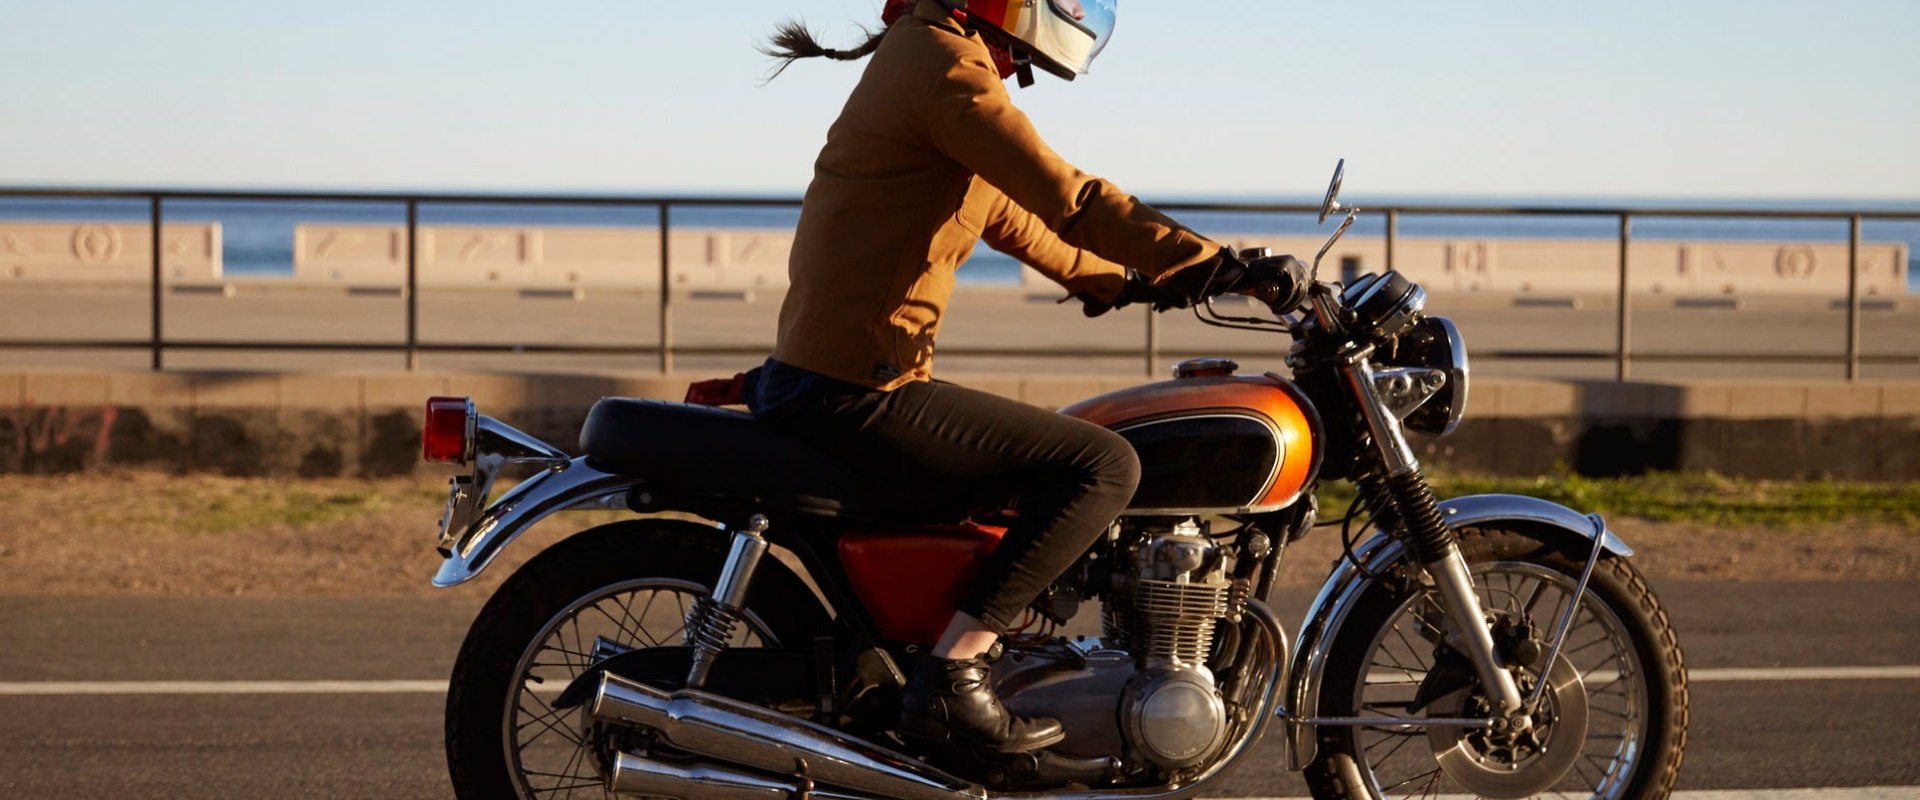 Motorcycle Insurance Options for Women Riders